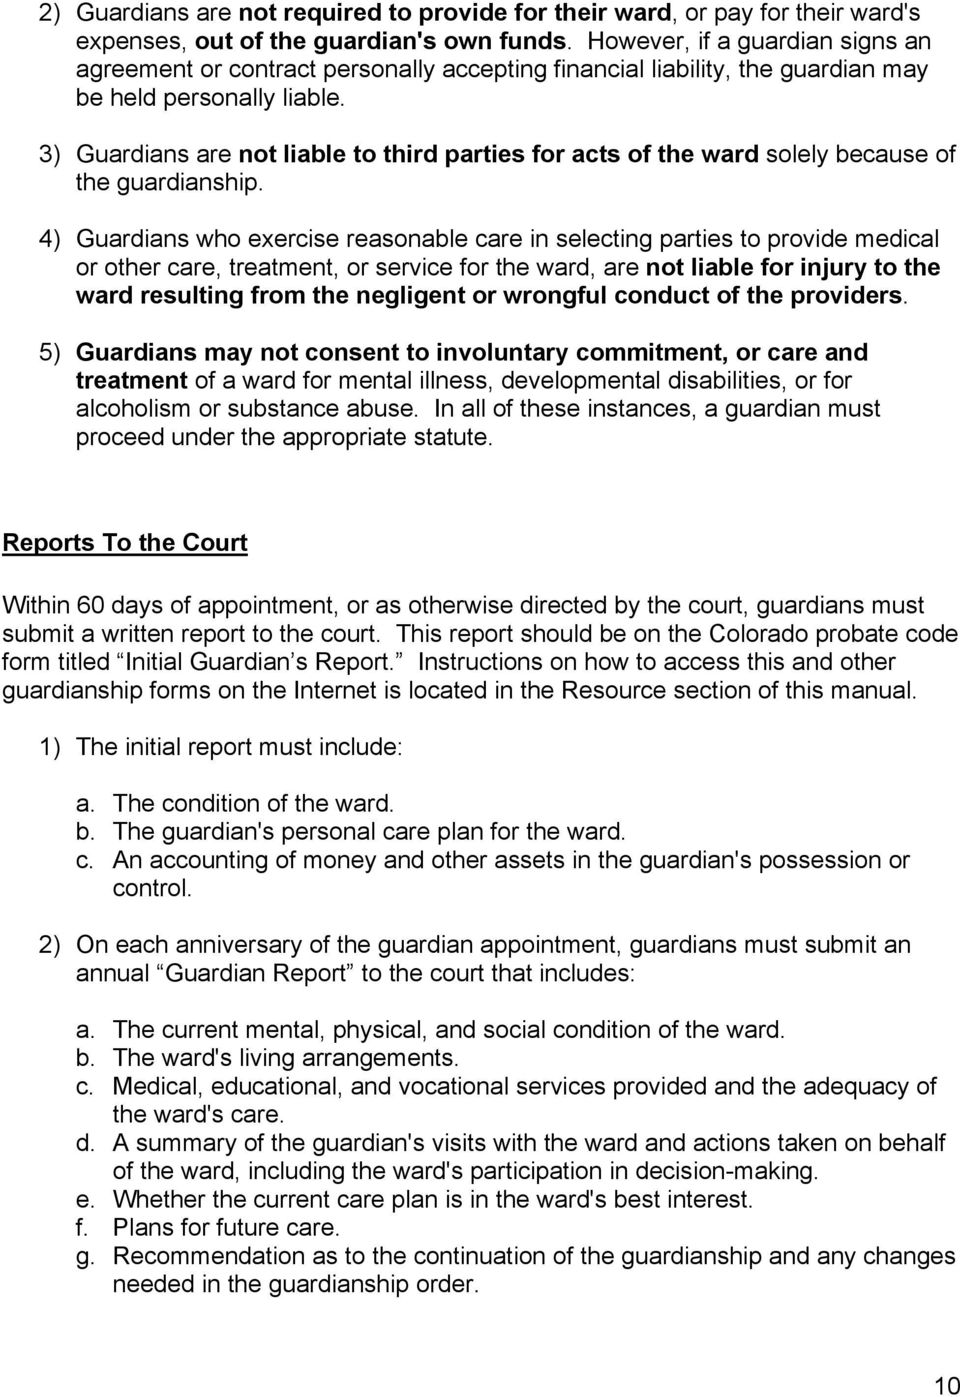 3) Guardians are not liable to third parties for acts of the ward solely because of the guardianship.